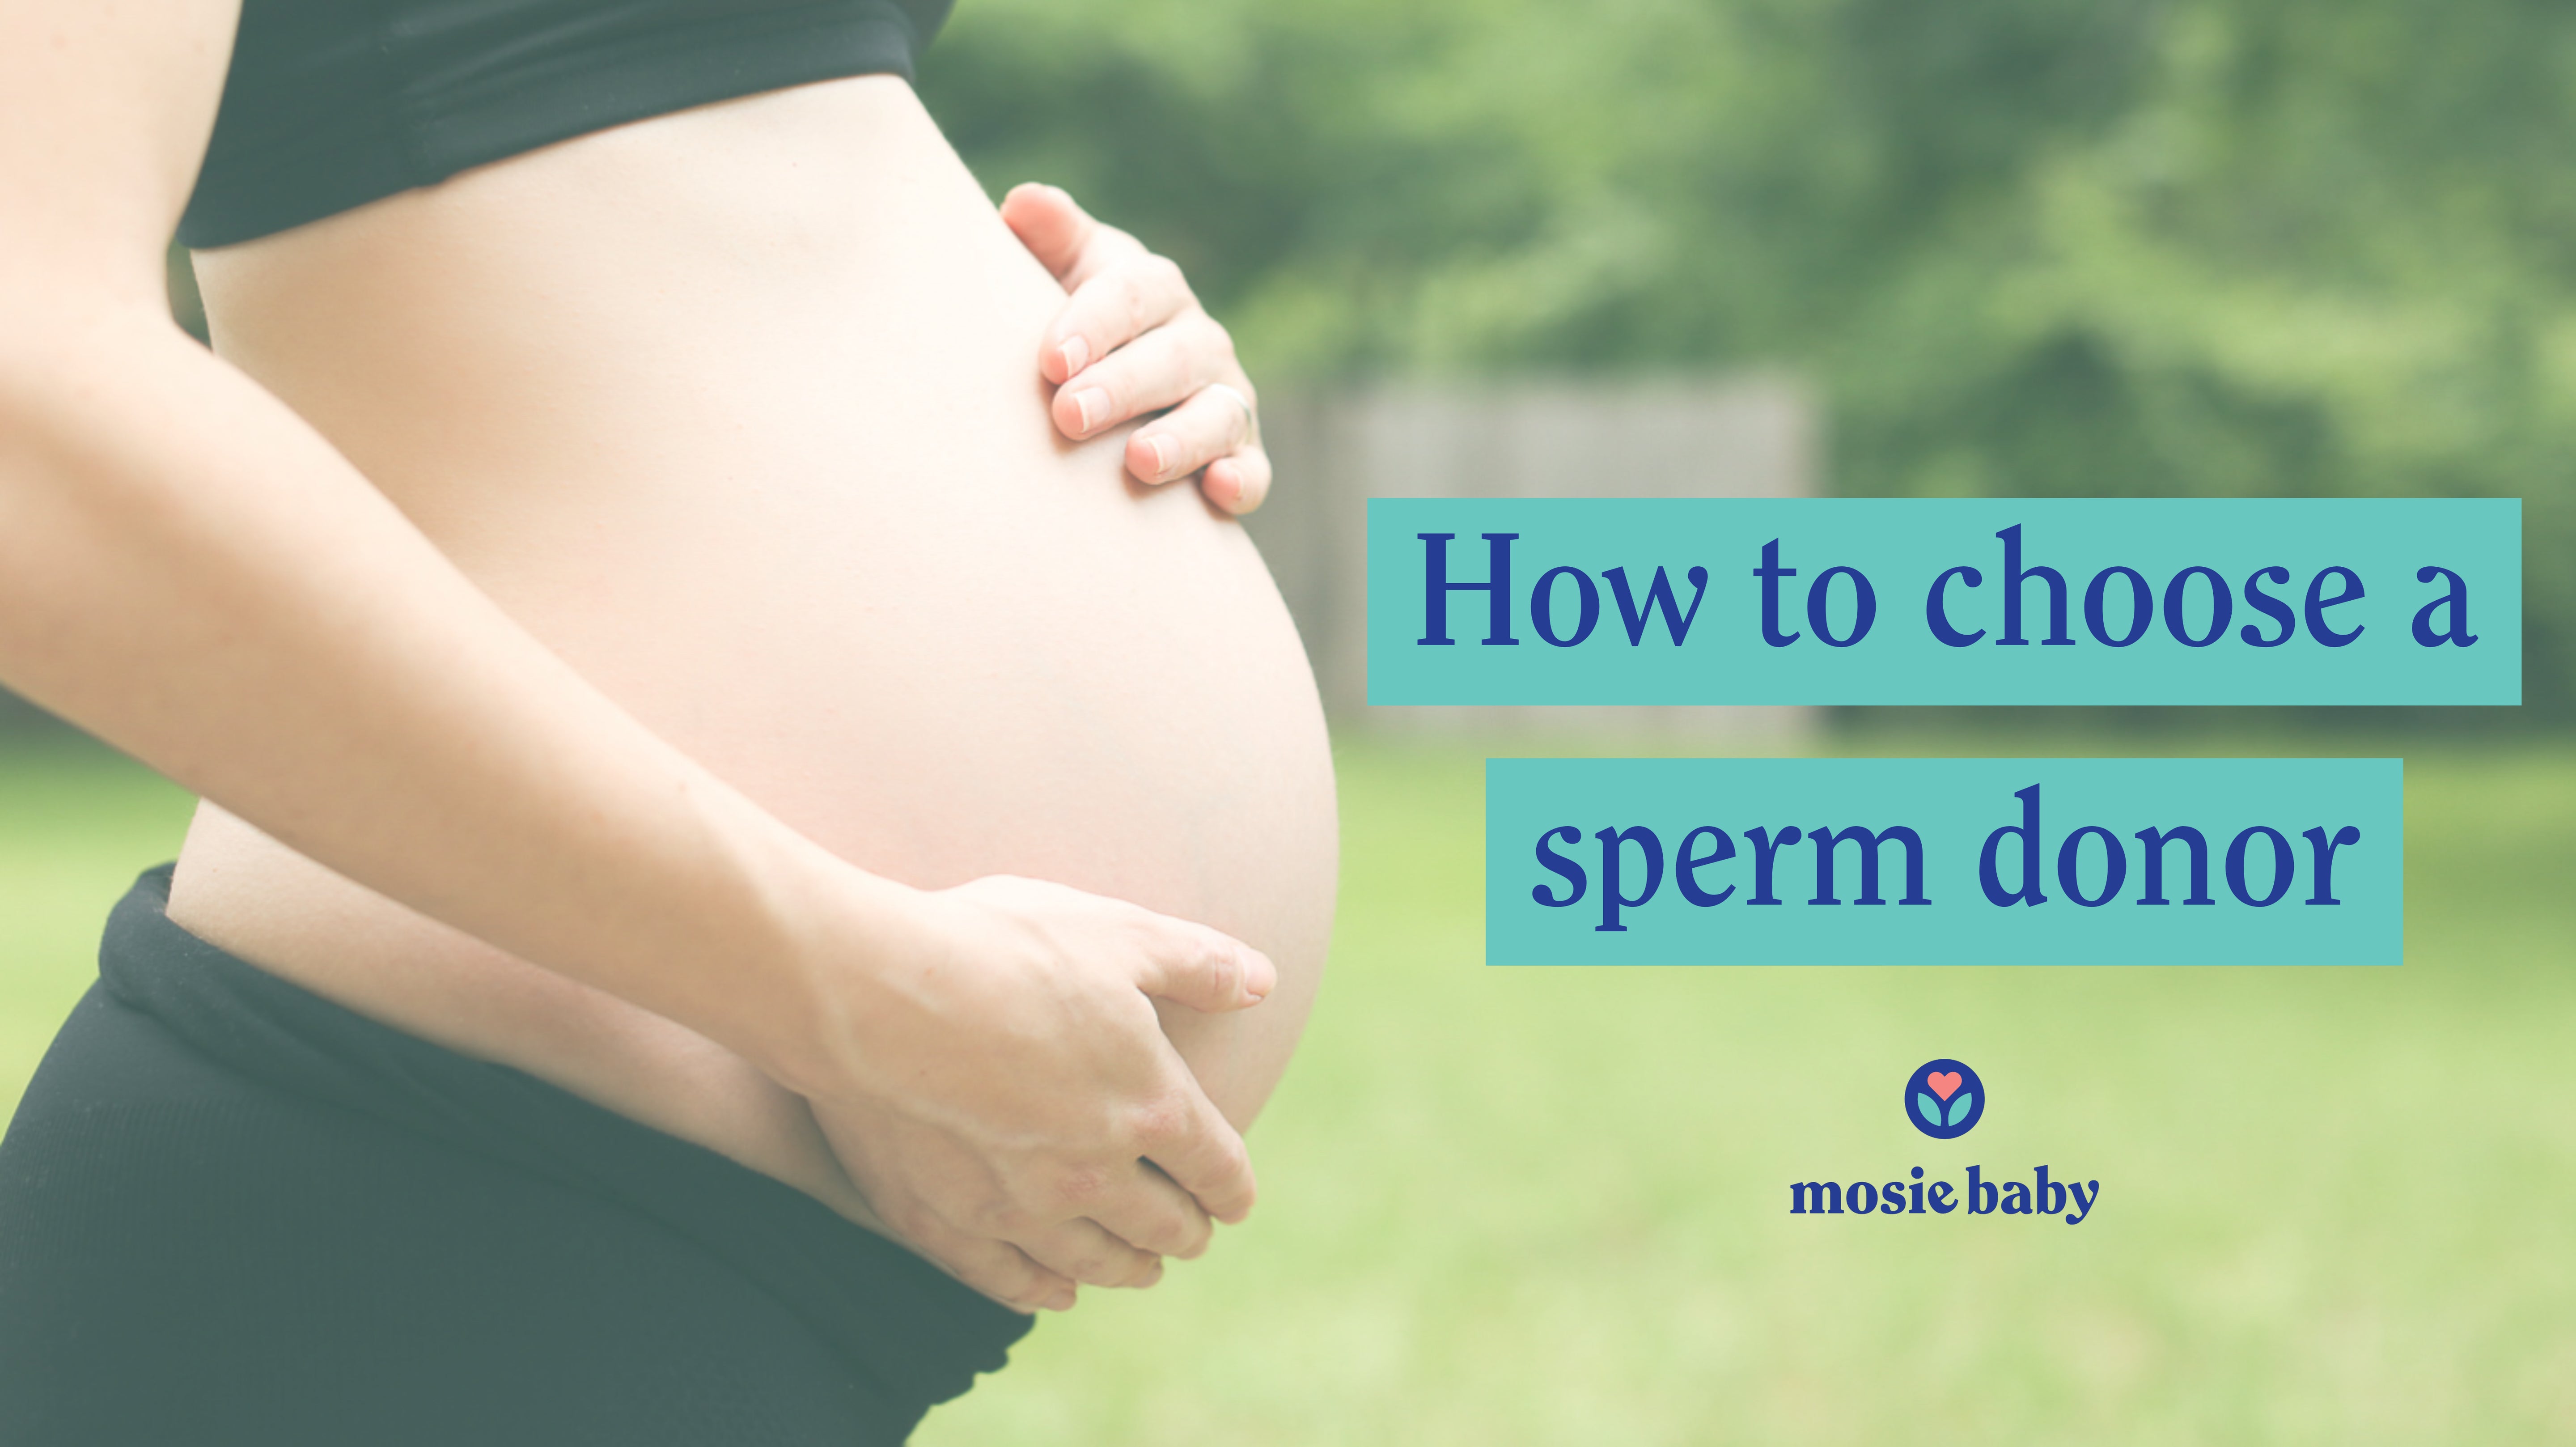 pregnant woman with the text "how to choose a sperm donor"